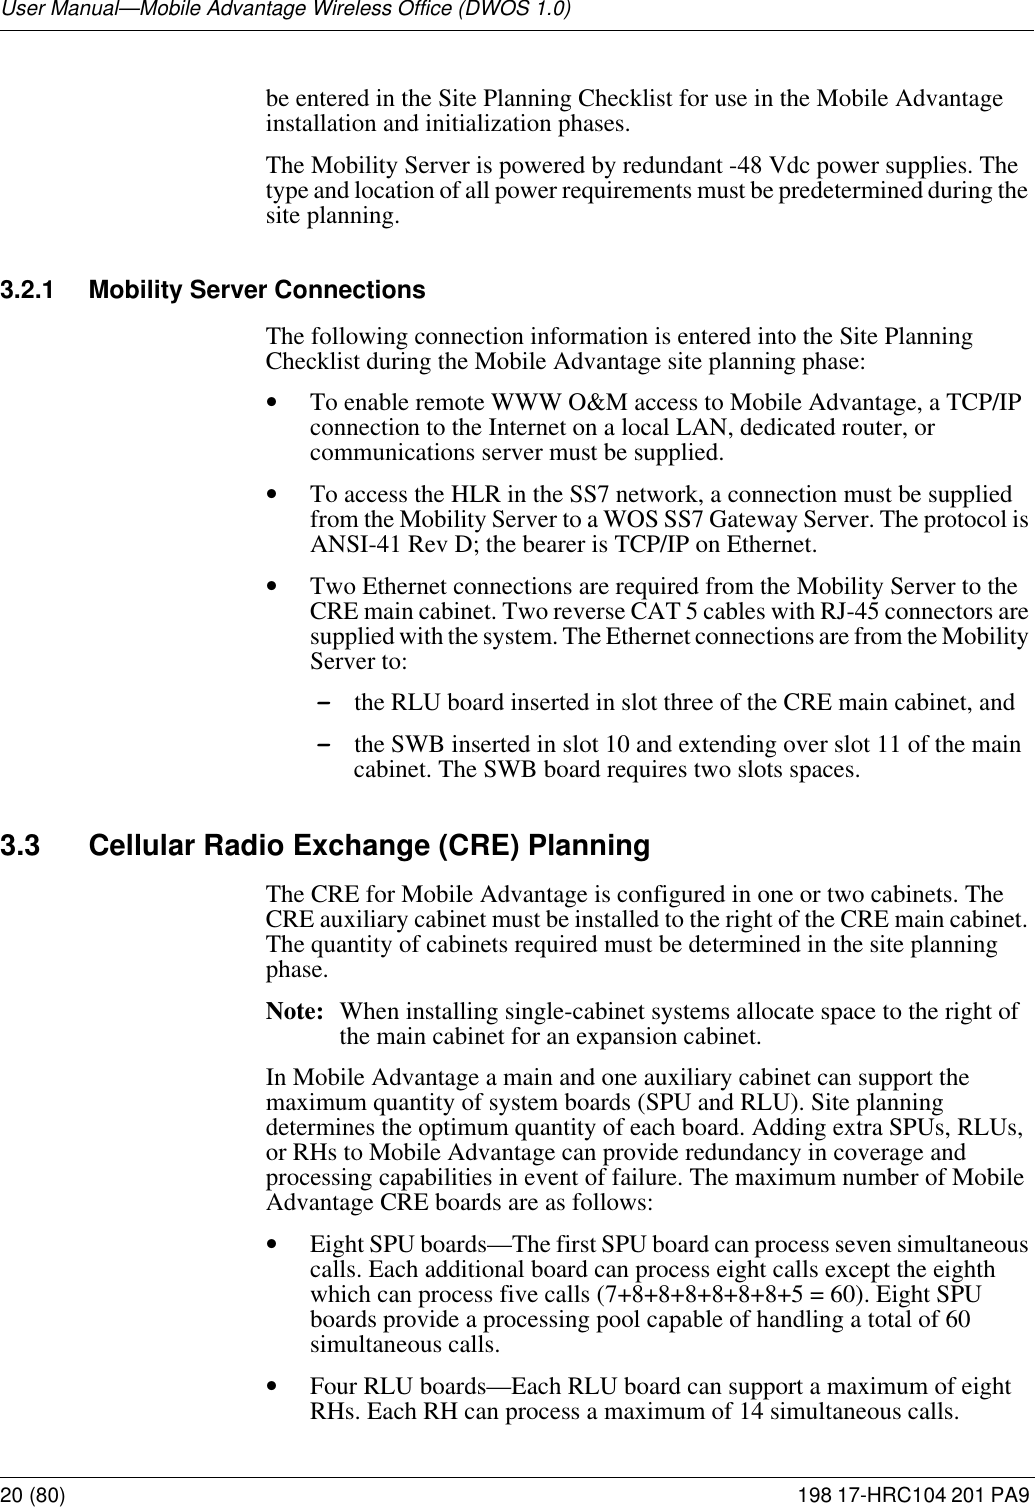 User Manual—Mobile Advantage Wireless Office (DWOS 1.0)20 (80) 198 17-HRC104 201 PA9 be entered in the Site Planning Checklist for use in the Mobile Advantage installation and initialization phases. The Mobility Server is powered by redundant -48 Vdc power supplies. The type and location of all power requirements must be predetermined during the site planning.3.2.1 Mobility Server ConnectionsThe following connection information is entered into the Site Planning Checklist during the Mobile Advantage site planning phase: •To enable remote WWW O&amp;M access to Mobile Advantage, a TCP/IP connection to the Internet on a local LAN, dedicated router, or communications server must be supplied. •To access the HLR in the SS7 network, a connection must be supplied from the Mobility Server to a WOS SS7 Gateway Server. The protocol is ANSI-41 Rev D; the bearer is TCP/IP on Ethernet. •Two Ethernet connections are required from the Mobility Server to the CRE main cabinet. Two reverse CAT 5 cables with RJ-45 connectors are supplied with the system. The Ethernet connections are from the Mobility Server to:-the RLU board inserted in slot three of the CRE main cabinet, and-the SWB inserted in slot 10 and extending over slot 11 of the main cabinet. The SWB board requires two slots spaces. 3.3 Cellular Radio Exchange (CRE) PlanningThe CRE for Mobile Advantage is configured in one or two cabinets. The CRE auxiliary cabinet must be installed to the right of the CRE main cabinet. The quantity of cabinets required must be determined in the site planning phase.Note: When installing single-cabinet systems allocate space to the right of the main cabinet for an expansion cabinet. In Mobile Advantage a main and one auxiliary cabinet can support the maximum quantity of system boards (SPU and RLU). Site planning determines the optimum quantity of each board. Adding extra SPUs, RLUs, or RHs to Mobile Advantage can provide redundancy in coverage and processing capabilities in event of failure. The maximum number of Mobile Advantage CRE boards are as follows:•Eight SPU boards—The first SPU board can process seven simultaneous calls. Each additional board can process eight calls except the eighth which can process five calls (7+8+8+8+8+8+8+5 = 60). Eight SPU boards provide a processing pool capable of handling a total of 60 simultaneous calls.•Four RLU boards—Each RLU board can support a maximum of eight RHs. Each RH can process a maximum of 14 simultaneous calls.